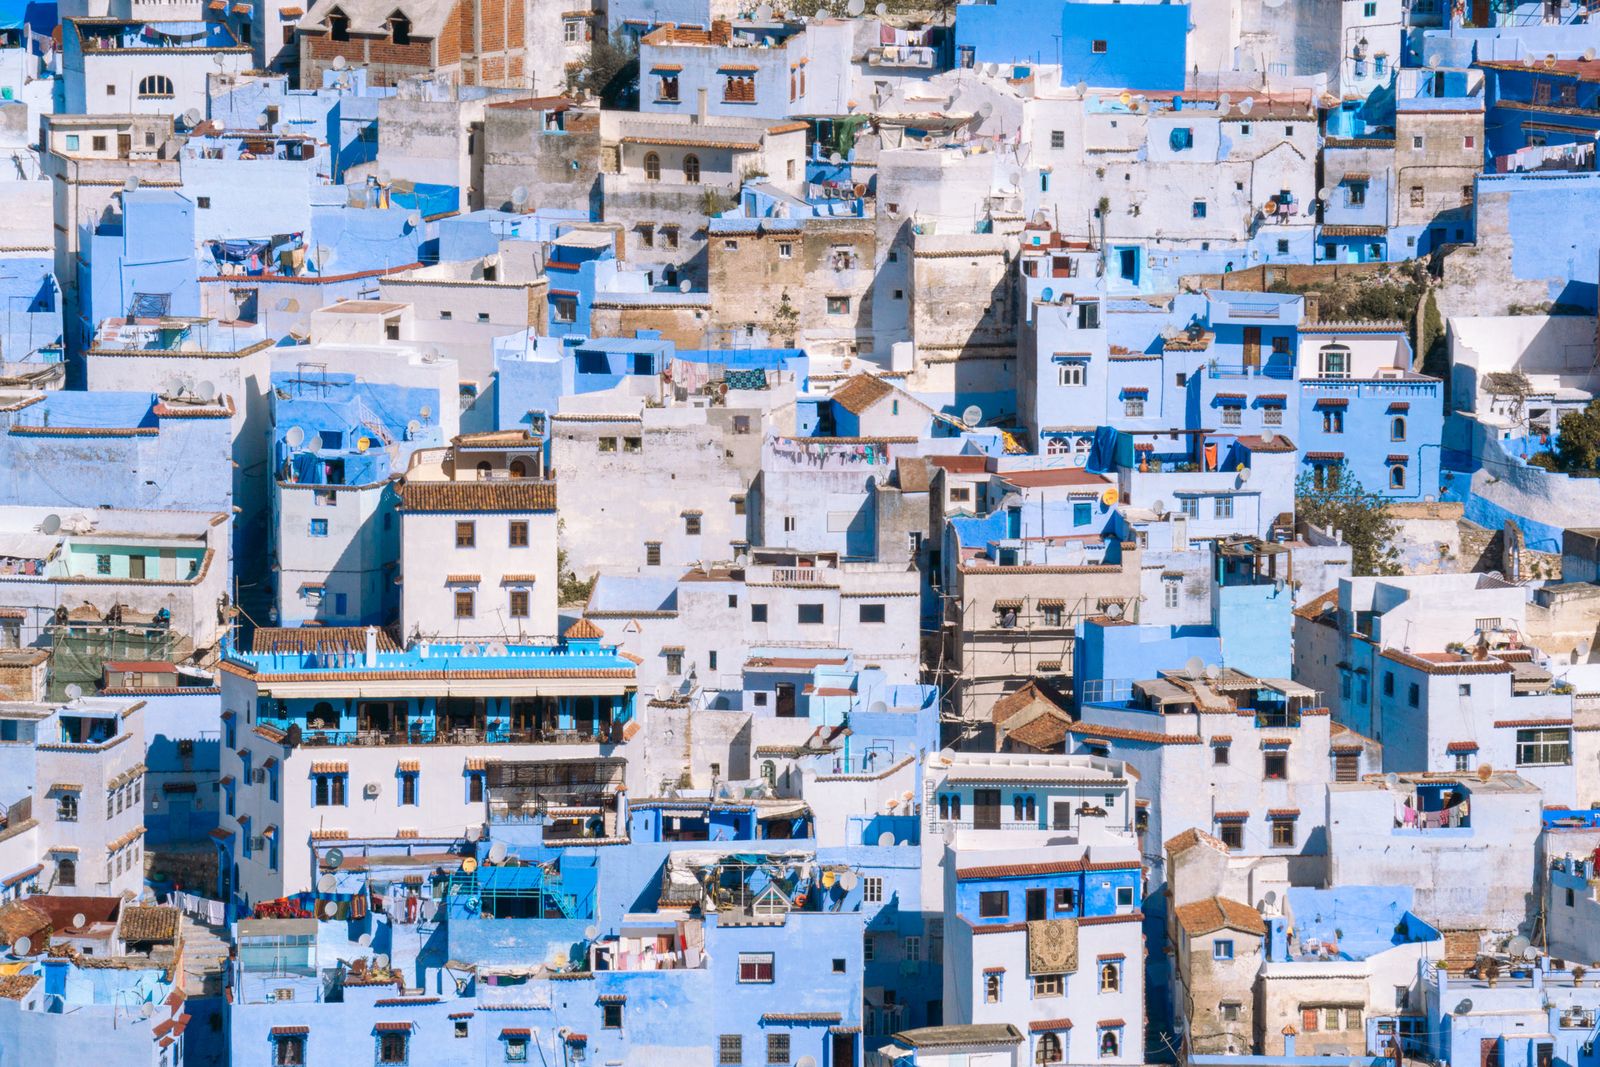 In the Mountains in Chefchaouen, Morocco – 2019